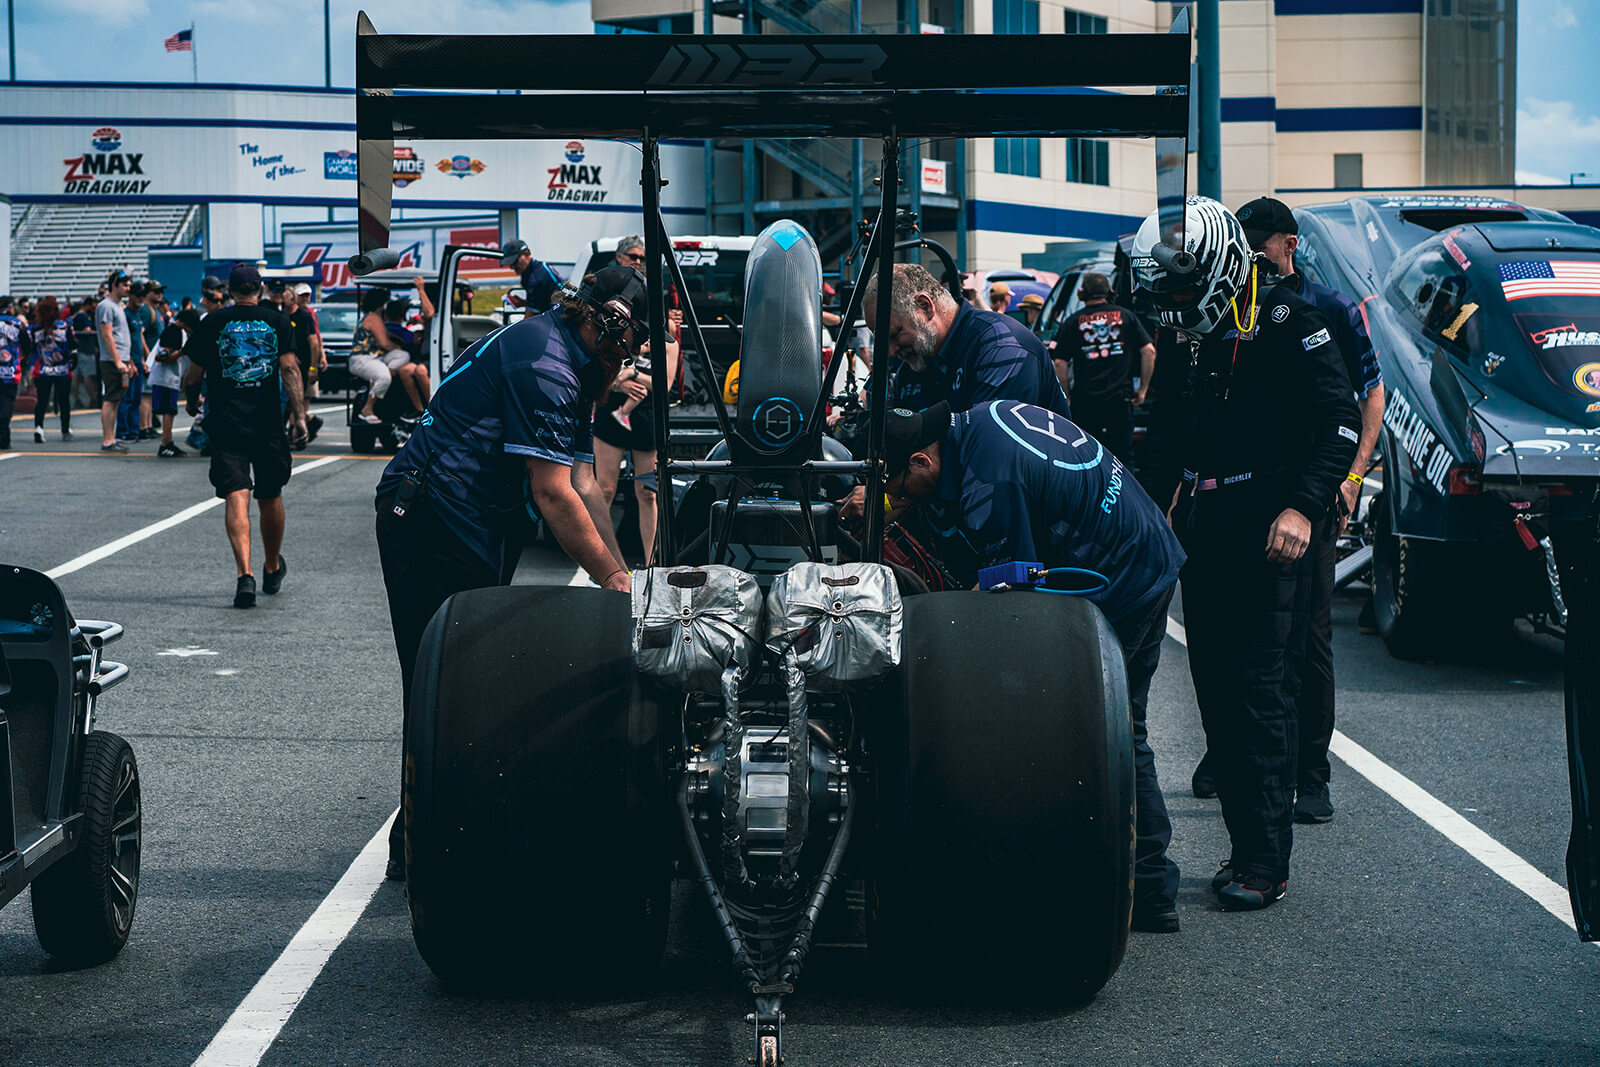 Michalek Brothers Racing has been hard at work since their last race, the 2022 NHRA Four-Wide Nationals in Charlotte, North Carolina, preparing for their upcoming 3-race Ohio stretch.